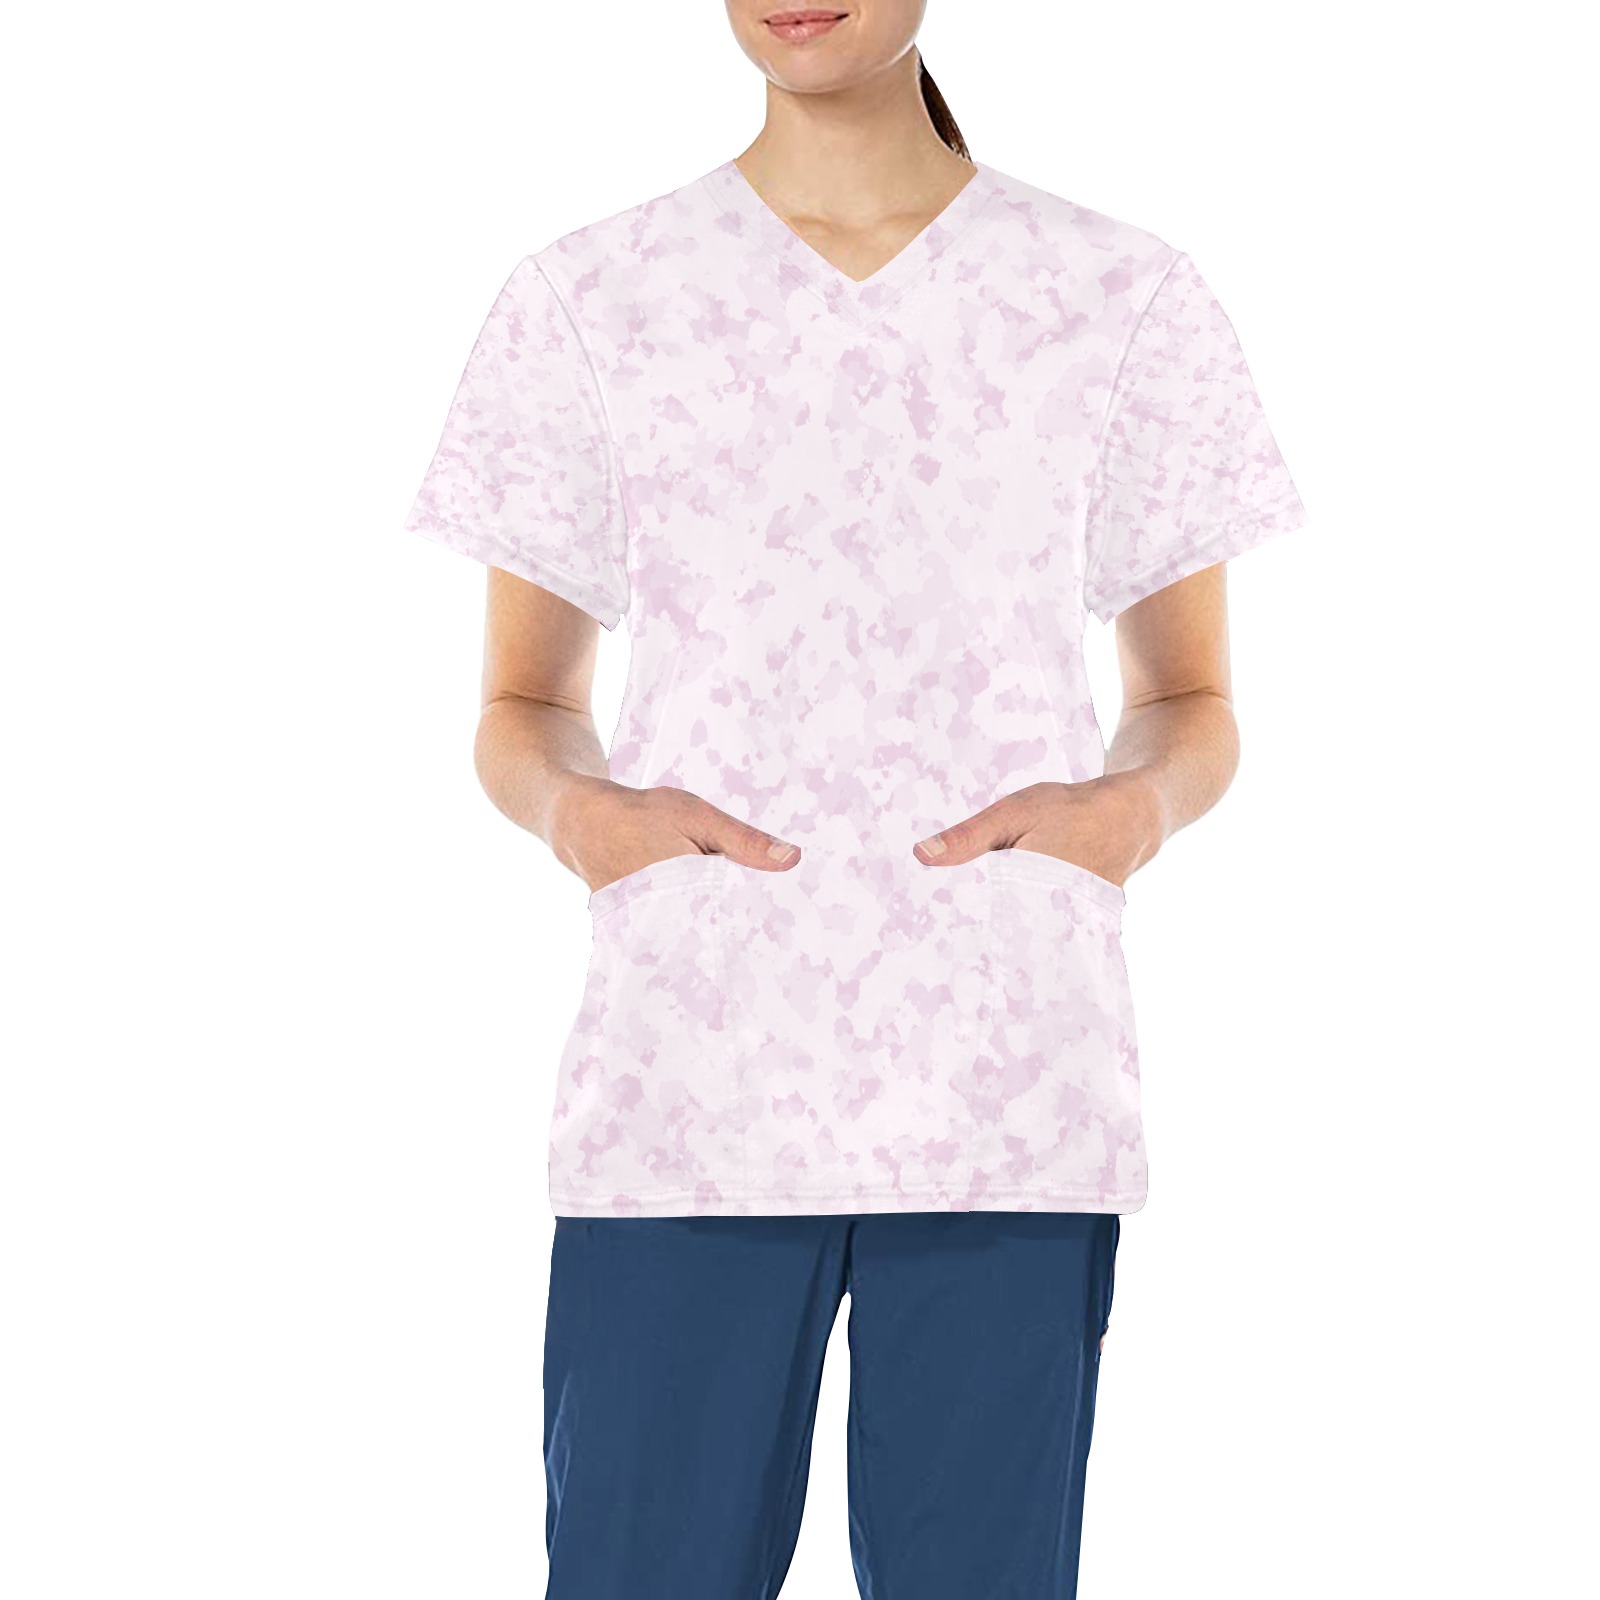 WILD ASTER-2 All Over Print Scrub Top